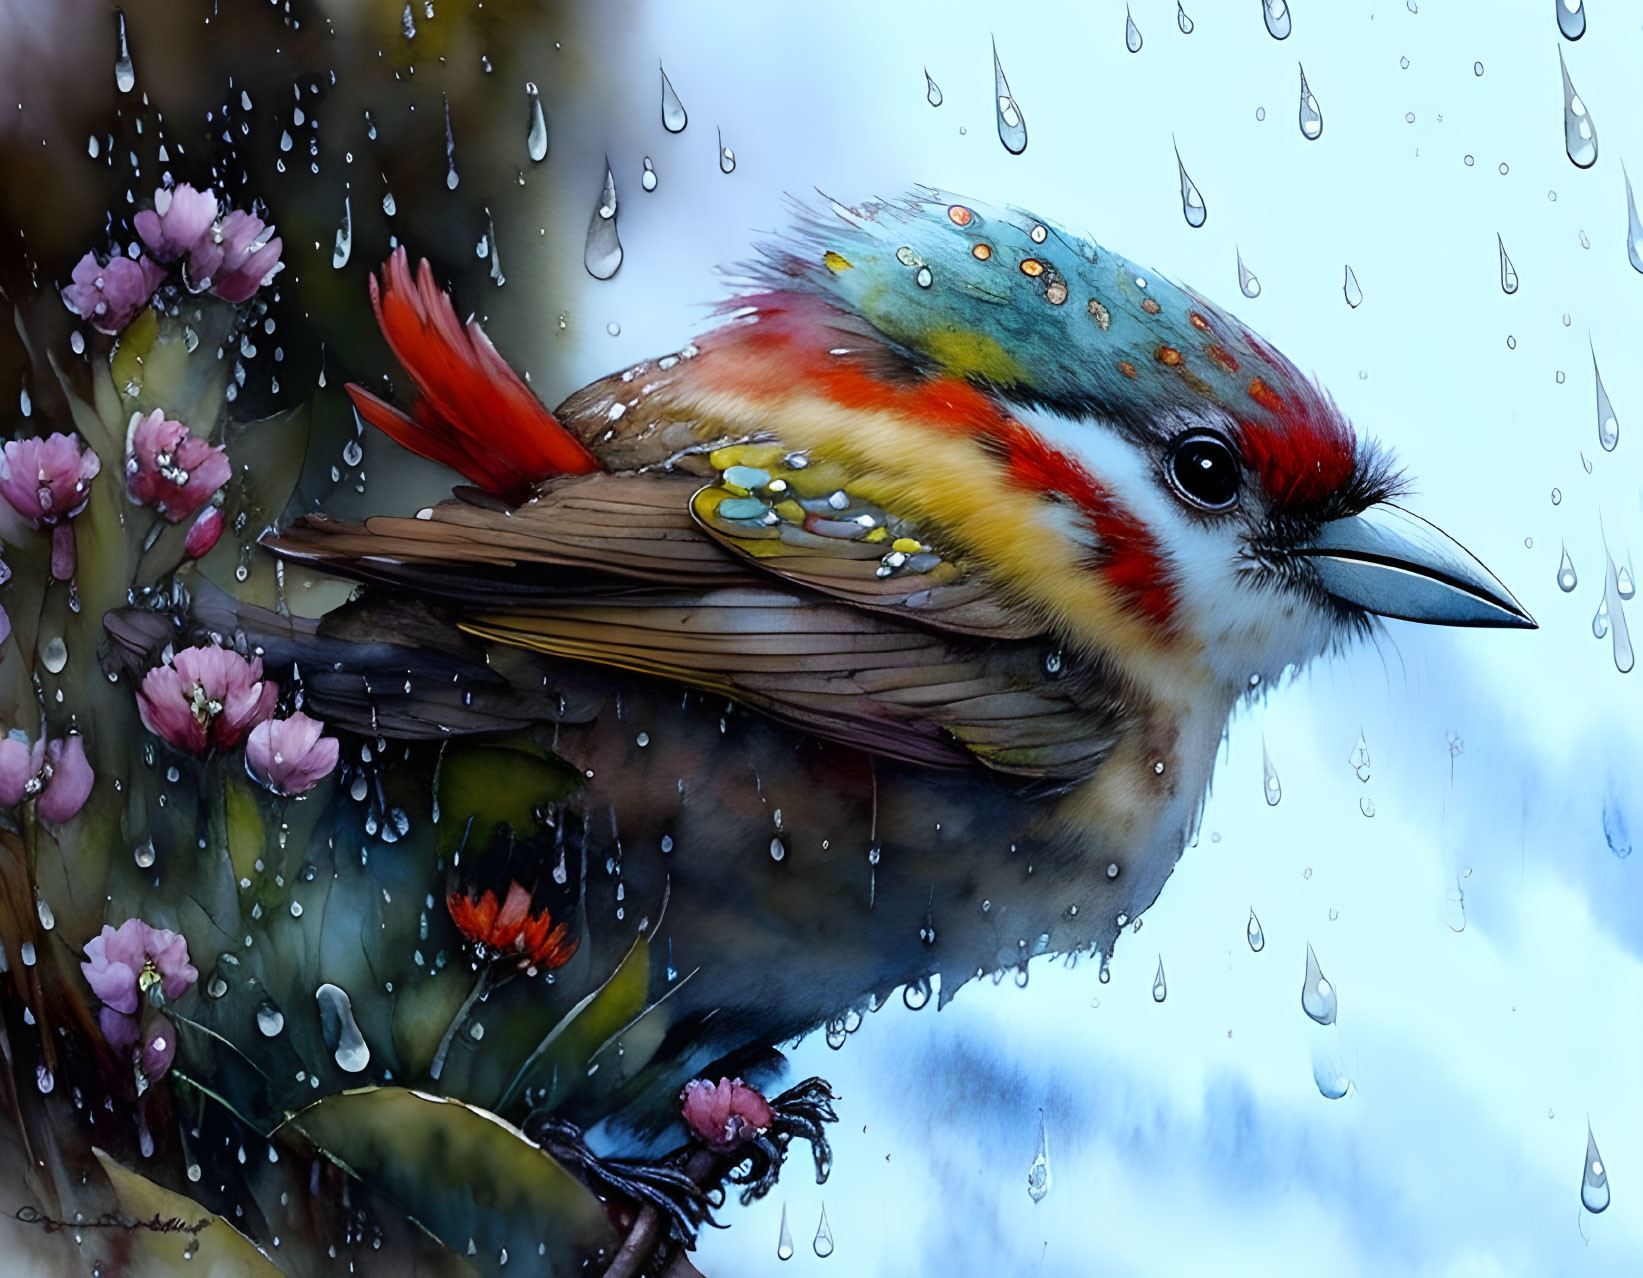 Vibrant bird on branch with colorful feathers and pink blossoms in rain.